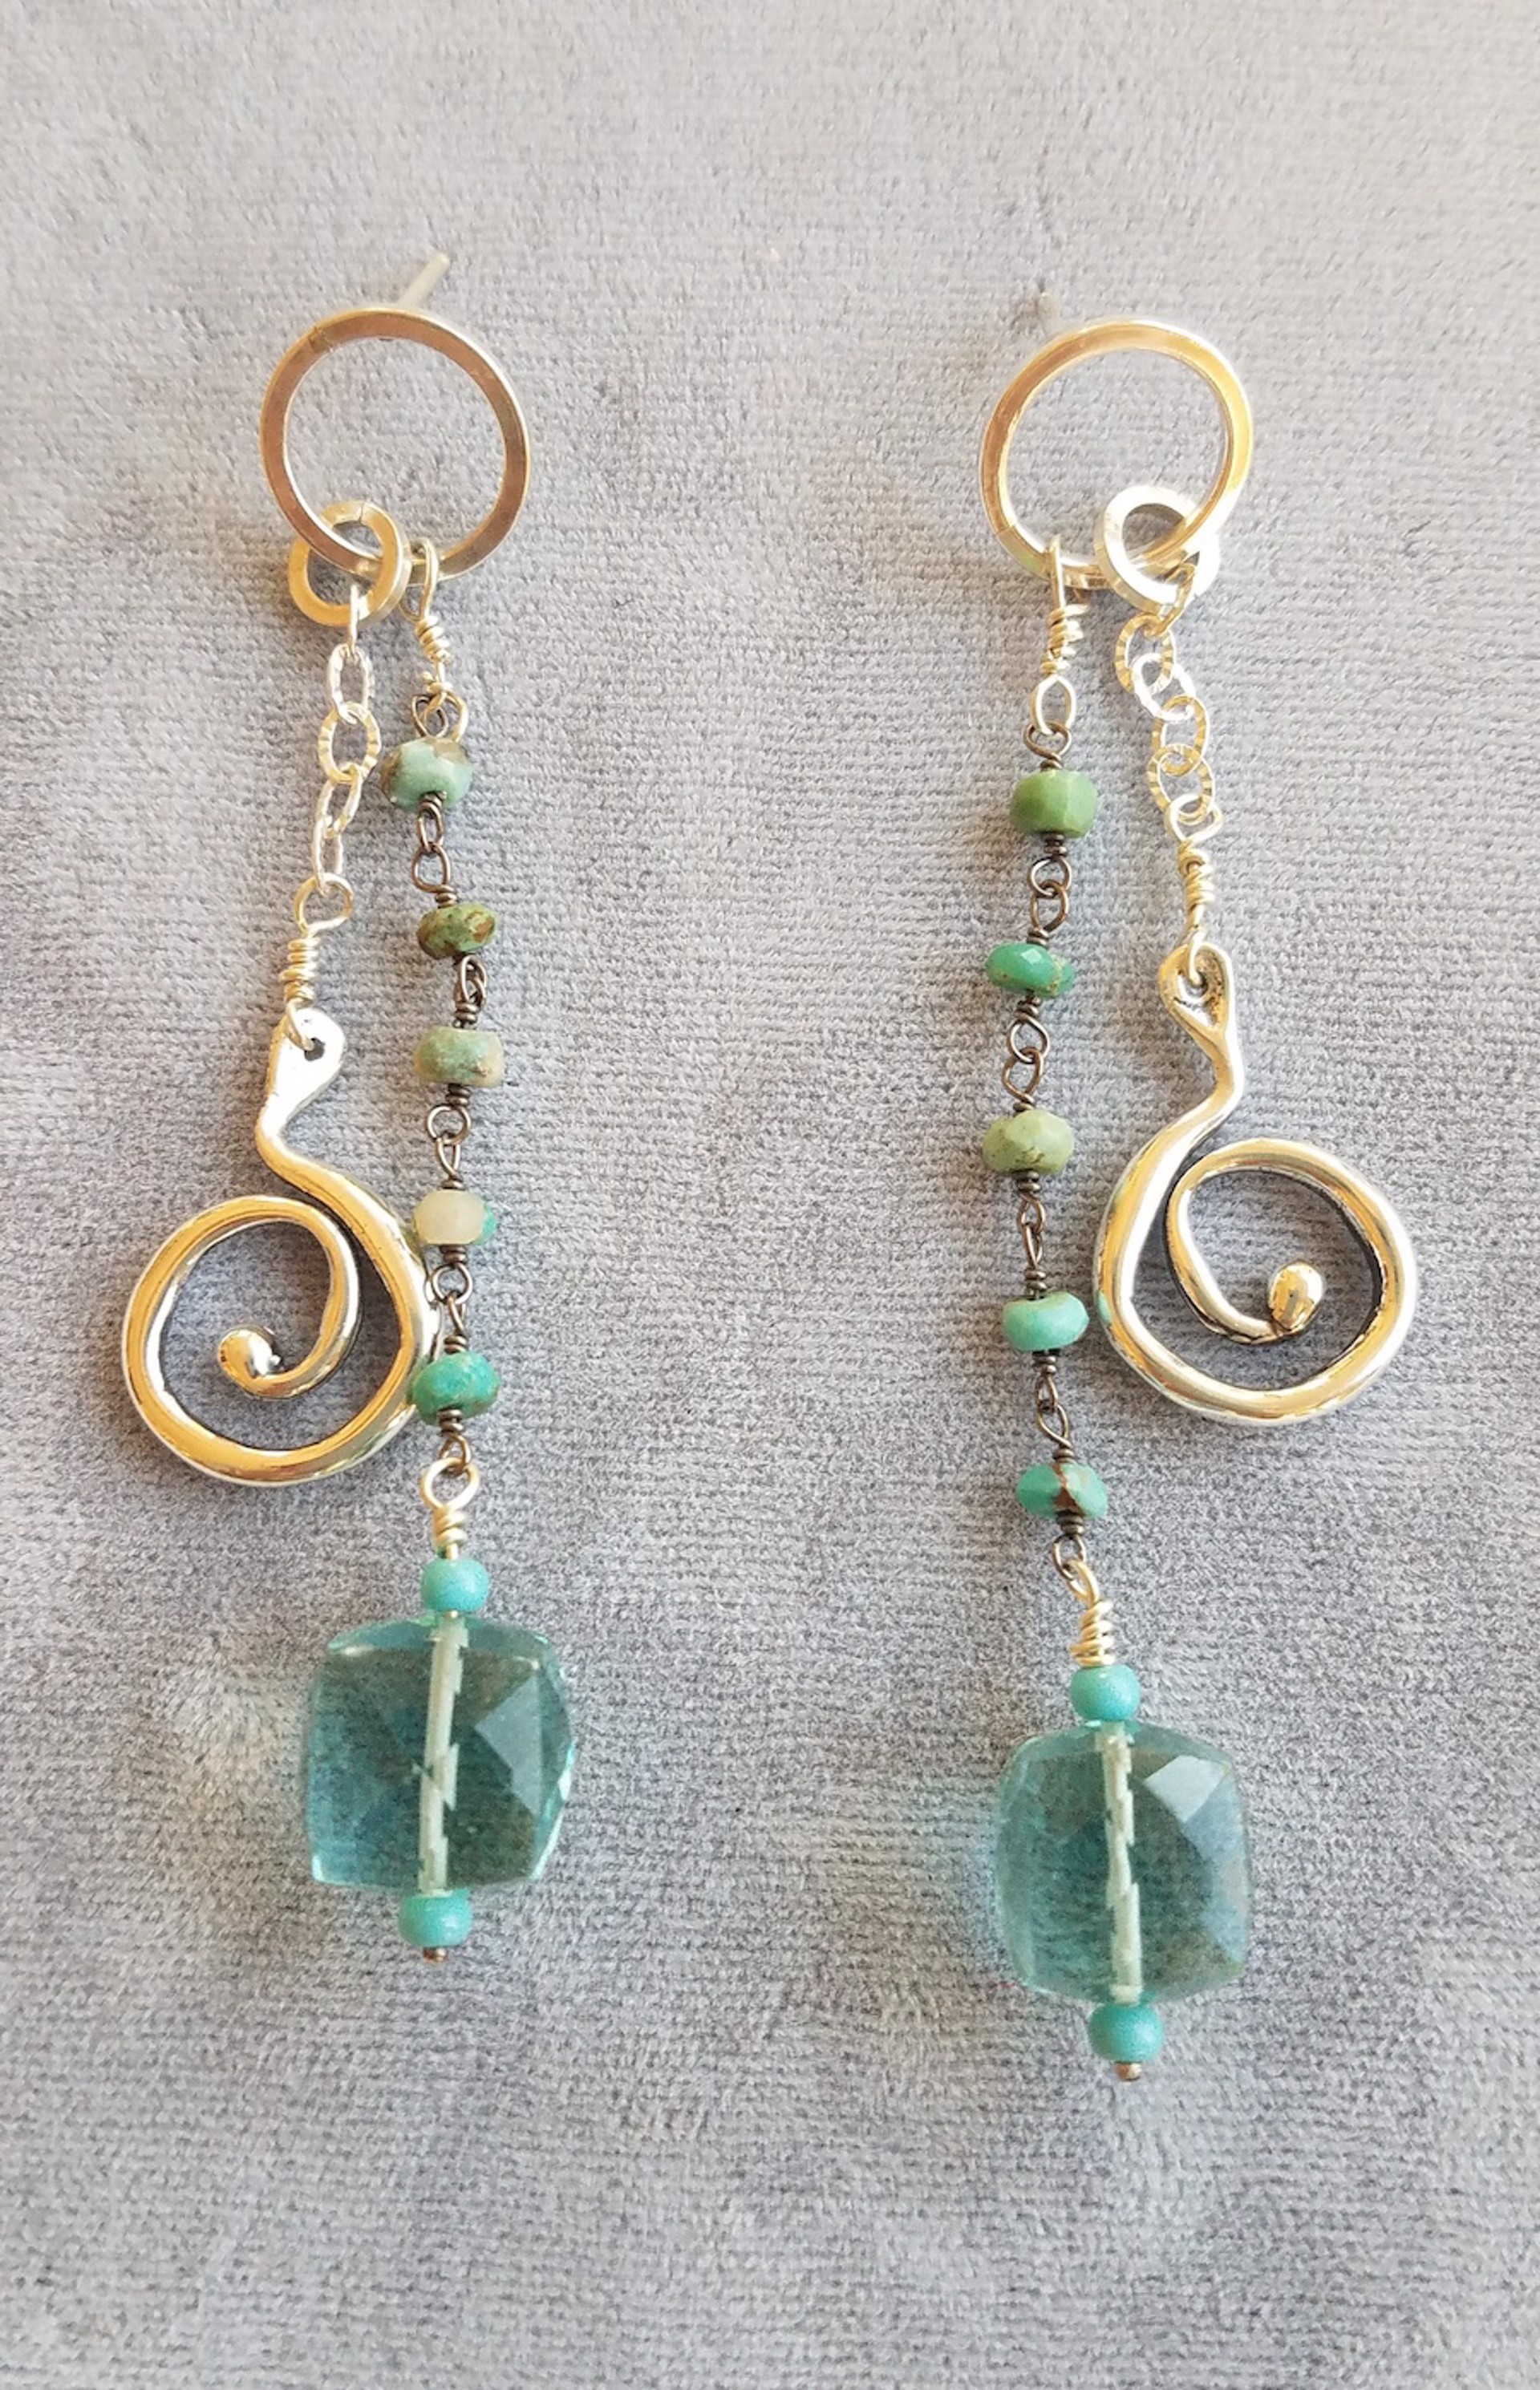 Earrings - Turquoise Bead Chain, Aqua Faceted Glass Beads & Sterling Silver DK 2805 by Doris King